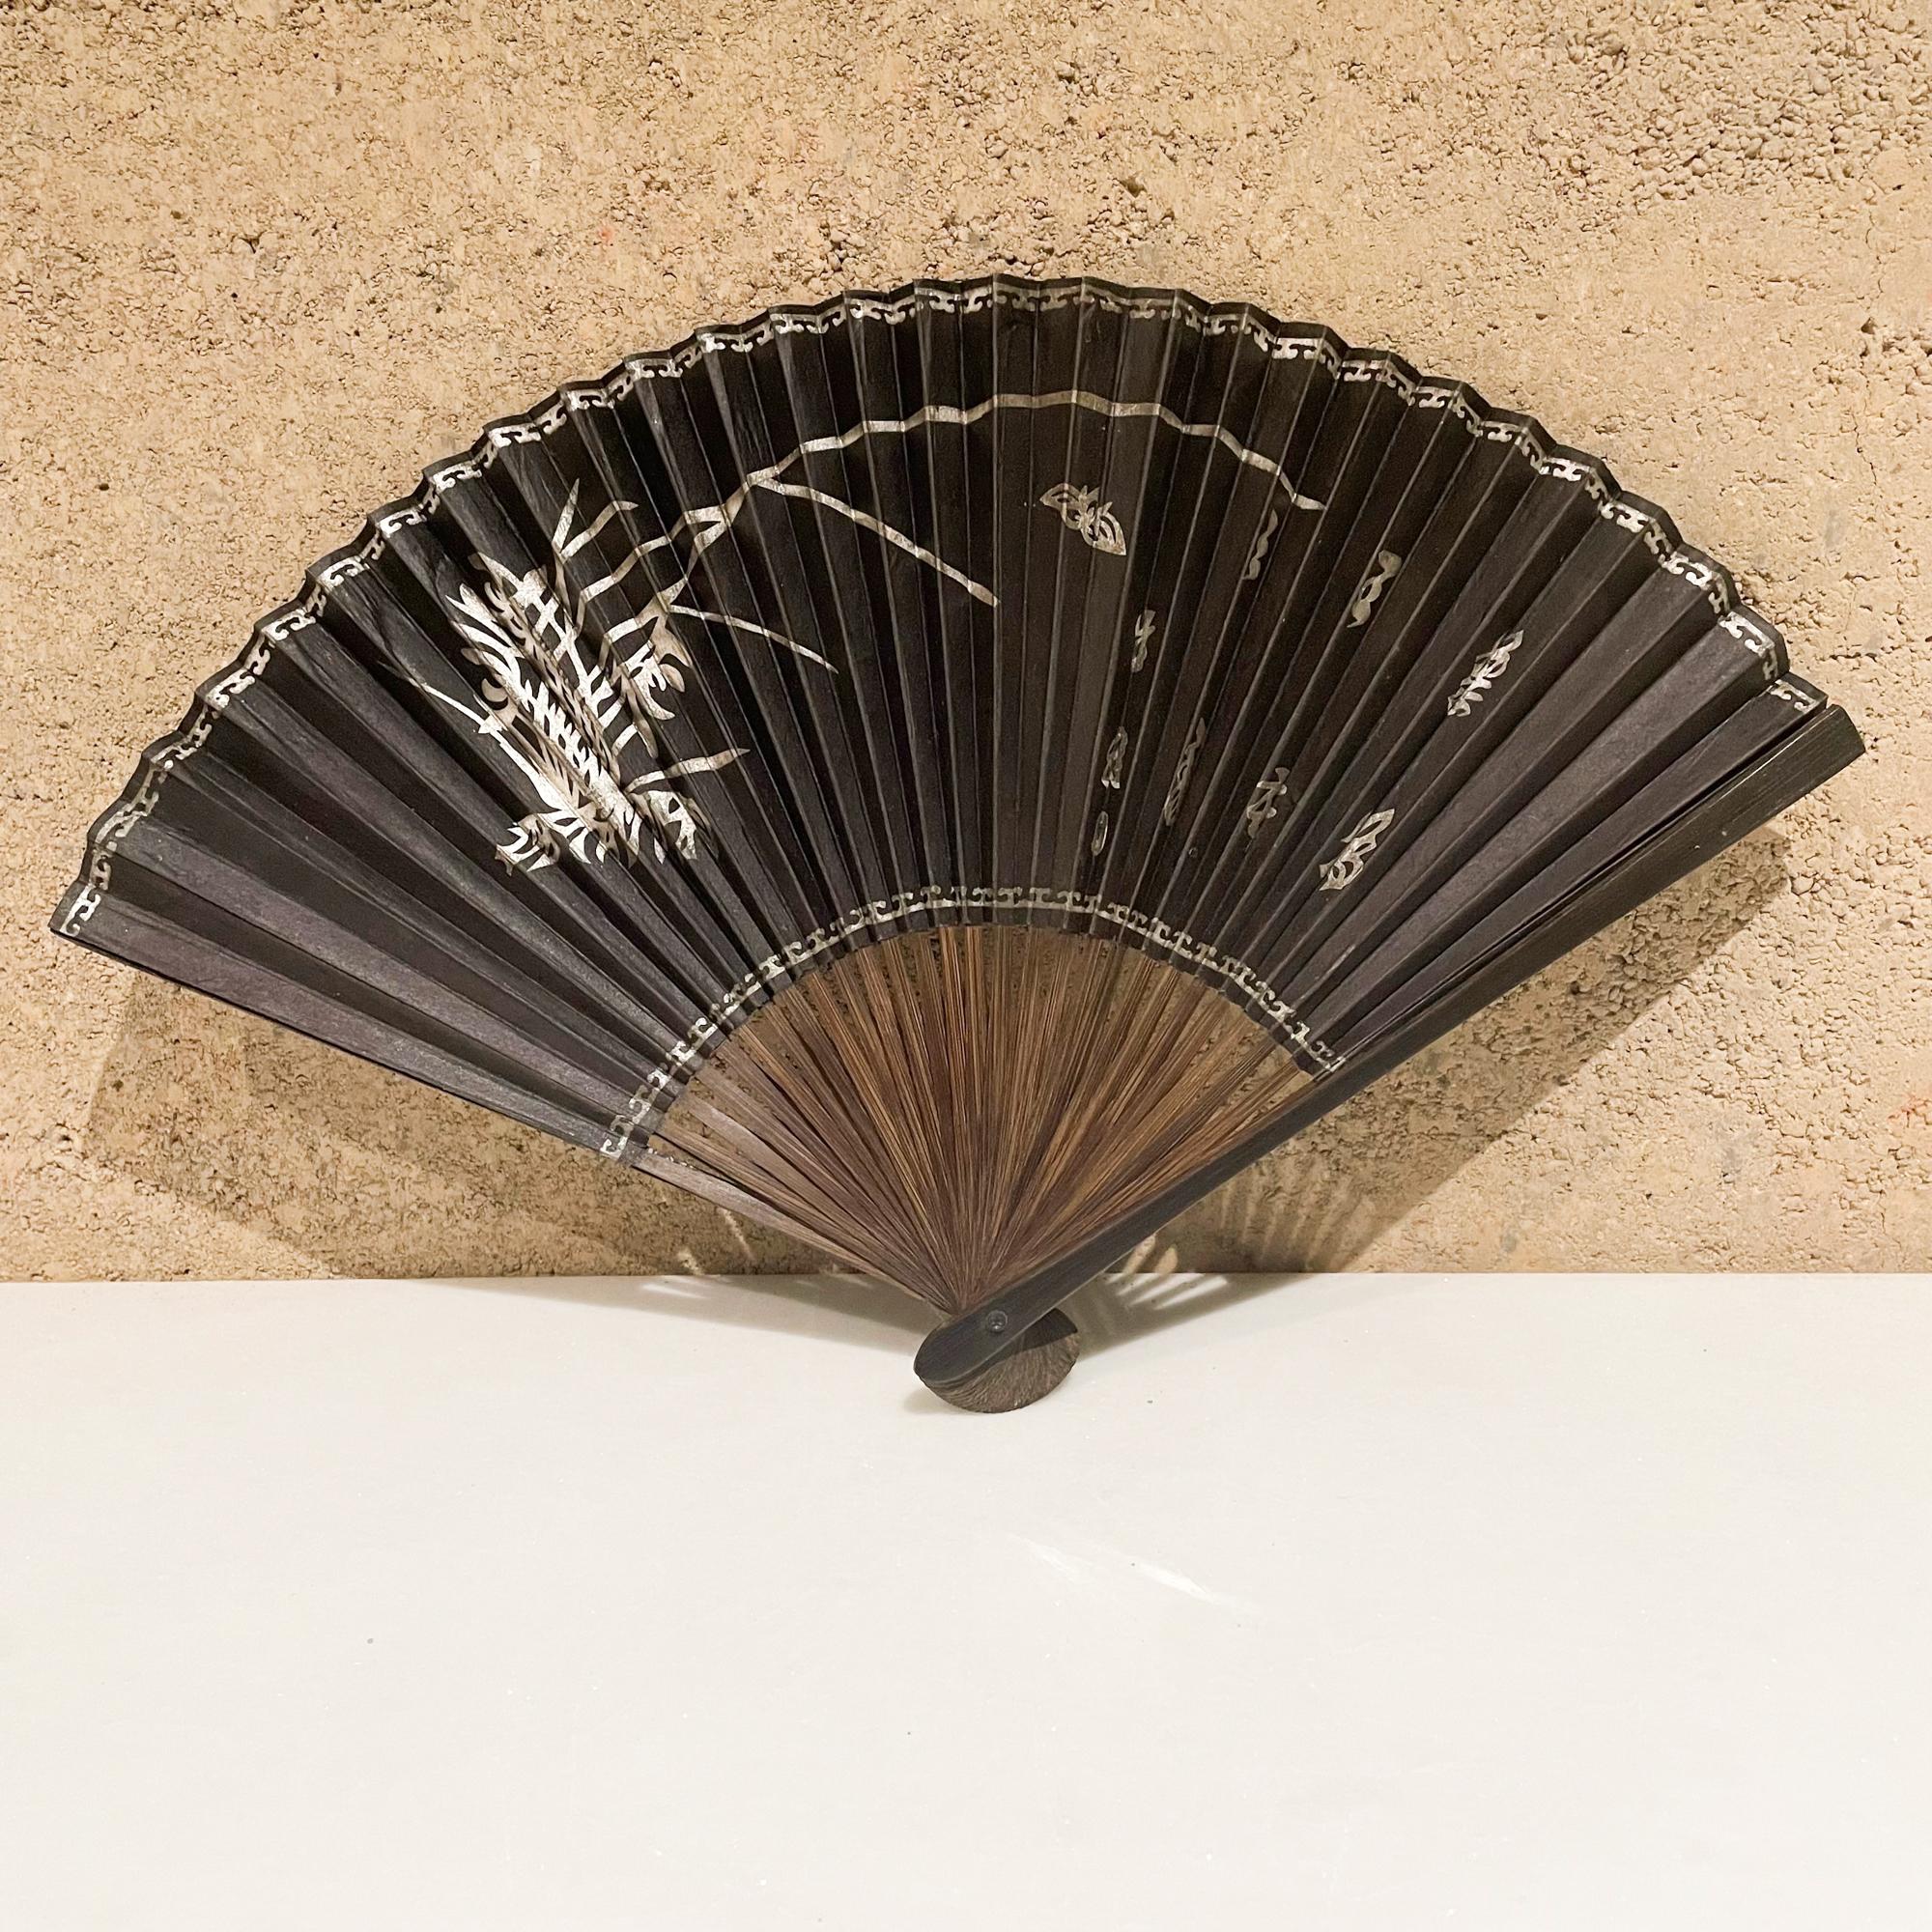 Folding fan
Antique Elegance Japanese black compact folding fan in exotic rosewood 
Lovely decorative art in Asian detail.
Measures: 7.88L x .88 W x .38 thick, closed 13 W open inches
Preowned unrestored vintage condition.
Refer to